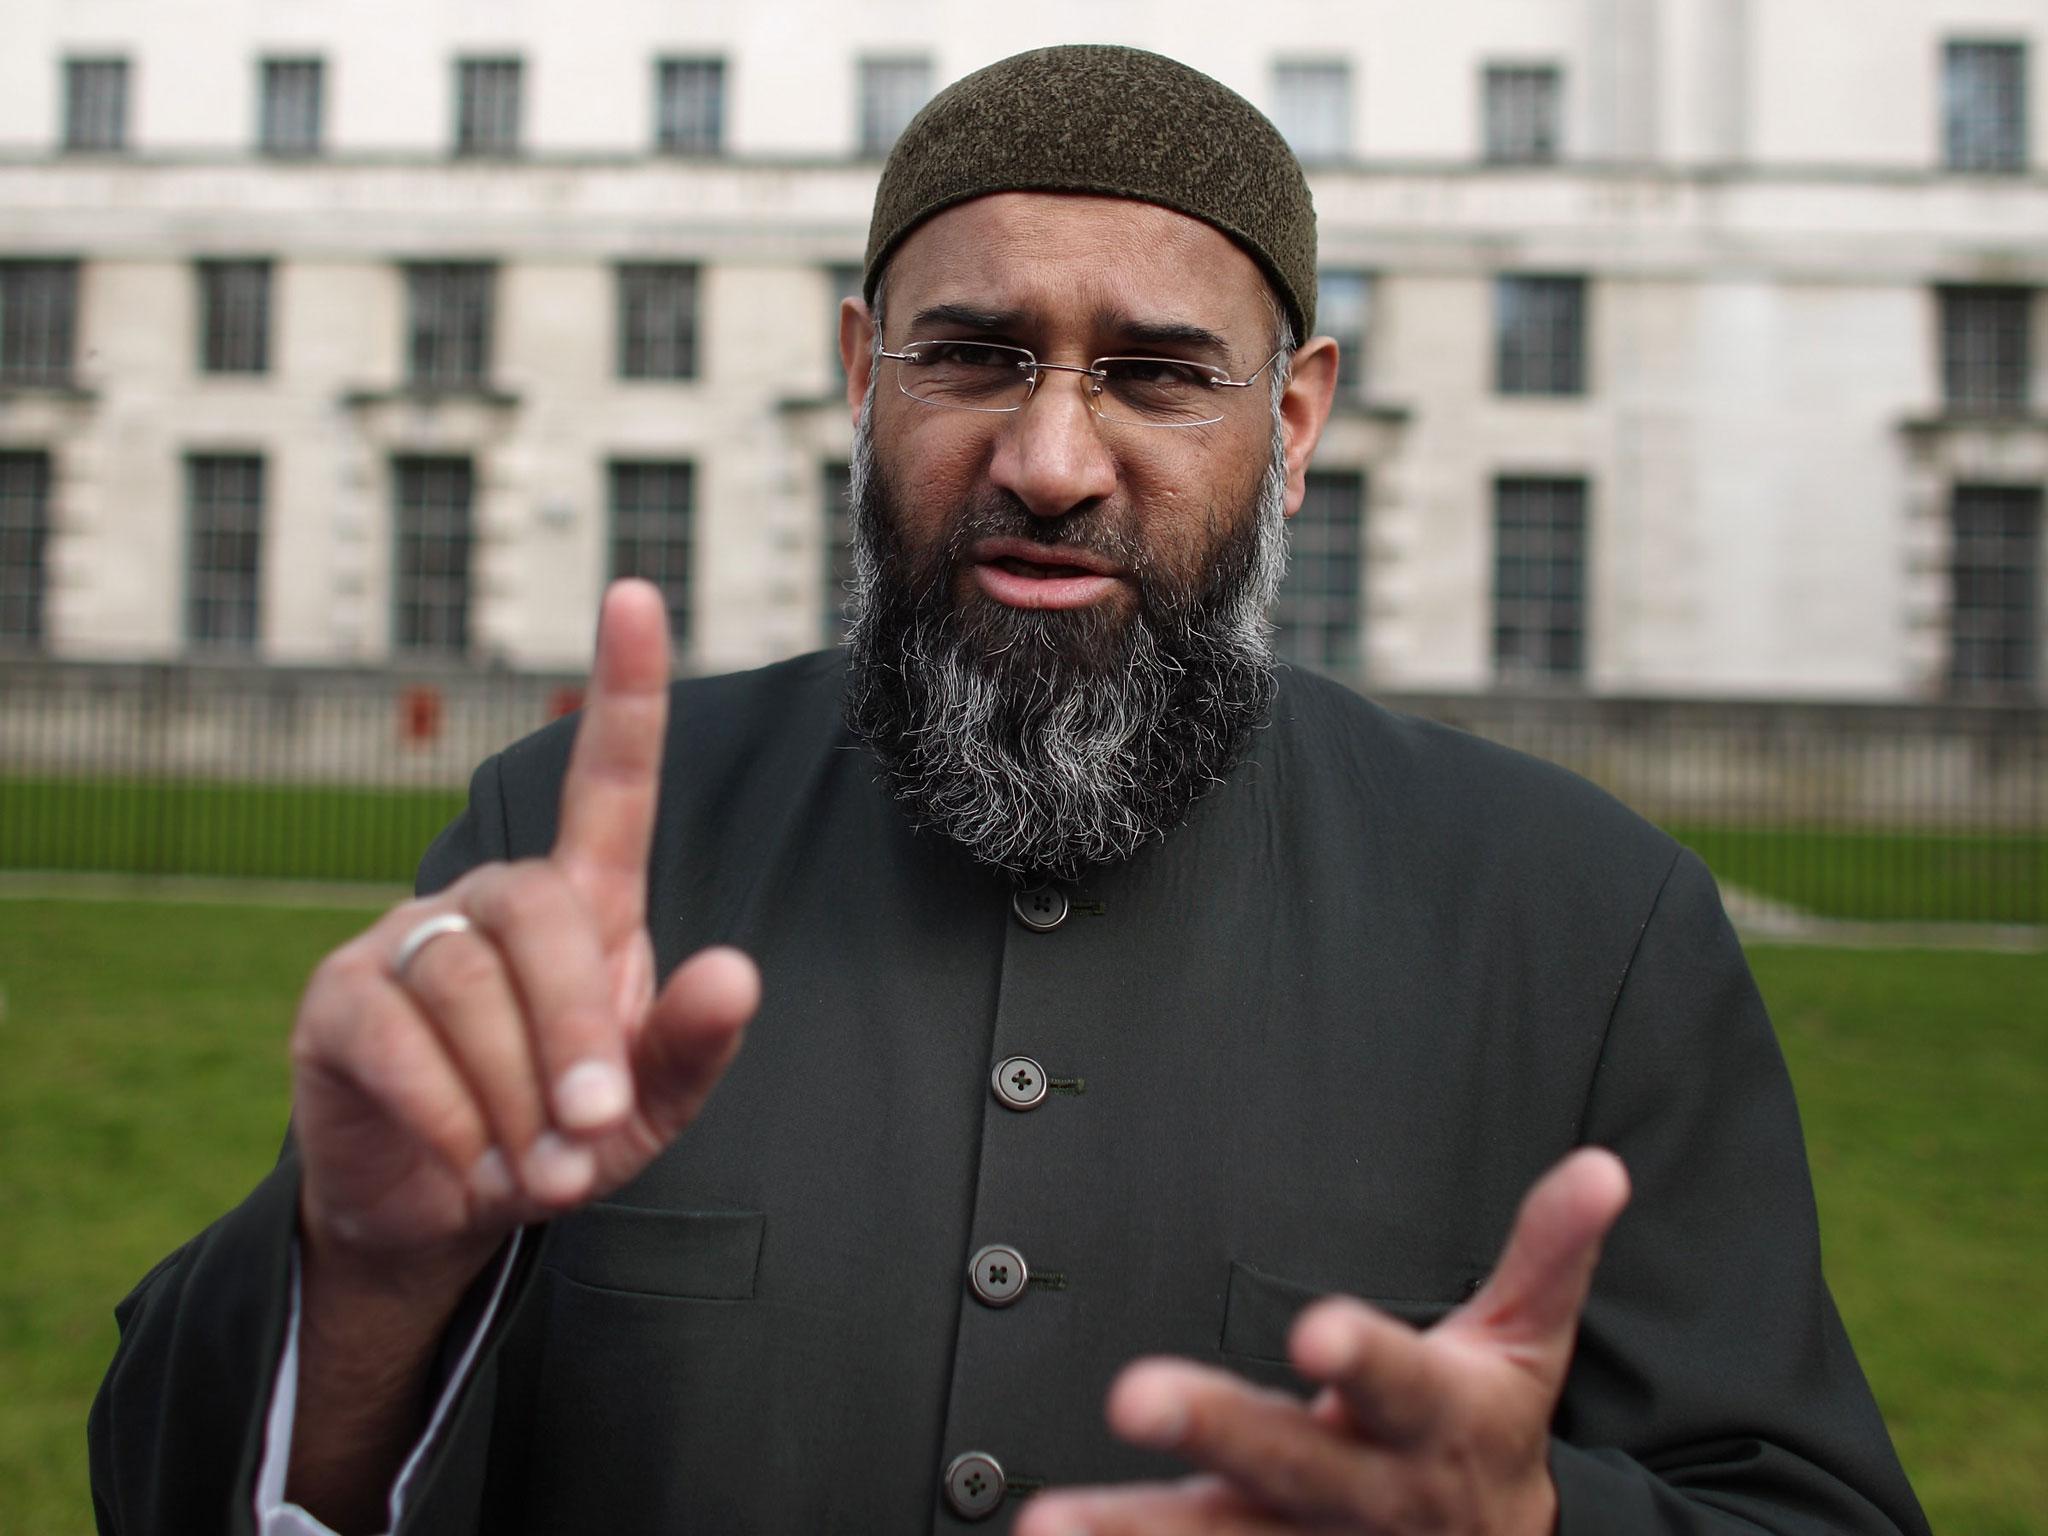 Anjem Choudary has been charged with three terror offences